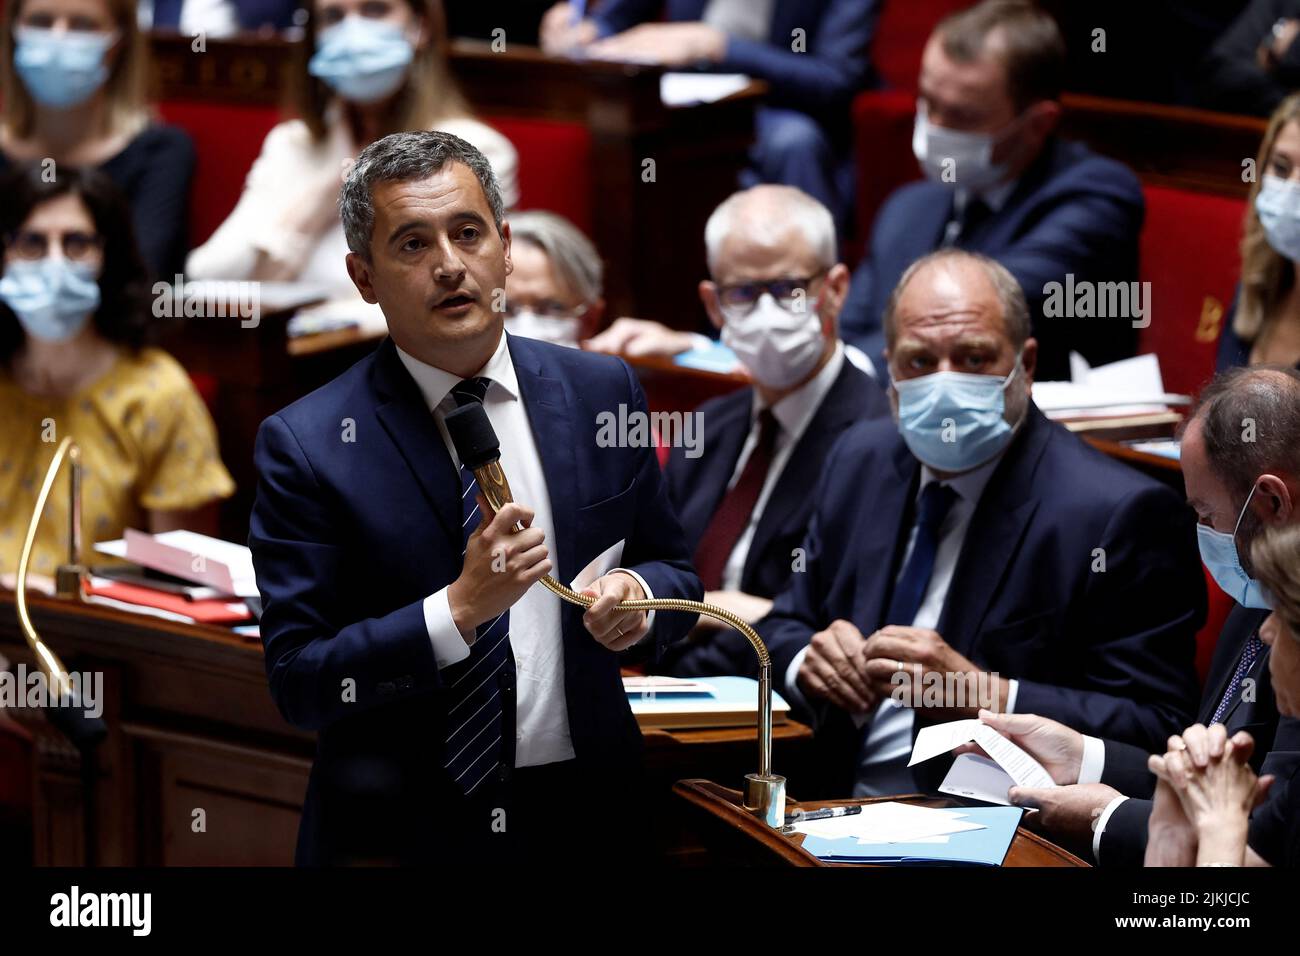 French Interior Minister Gerald Darmanin speaks during the questions to the government session at the National Assembly in Paris, France, August 2, 2022. REUTERS/Benoit Tessier Stock Photo